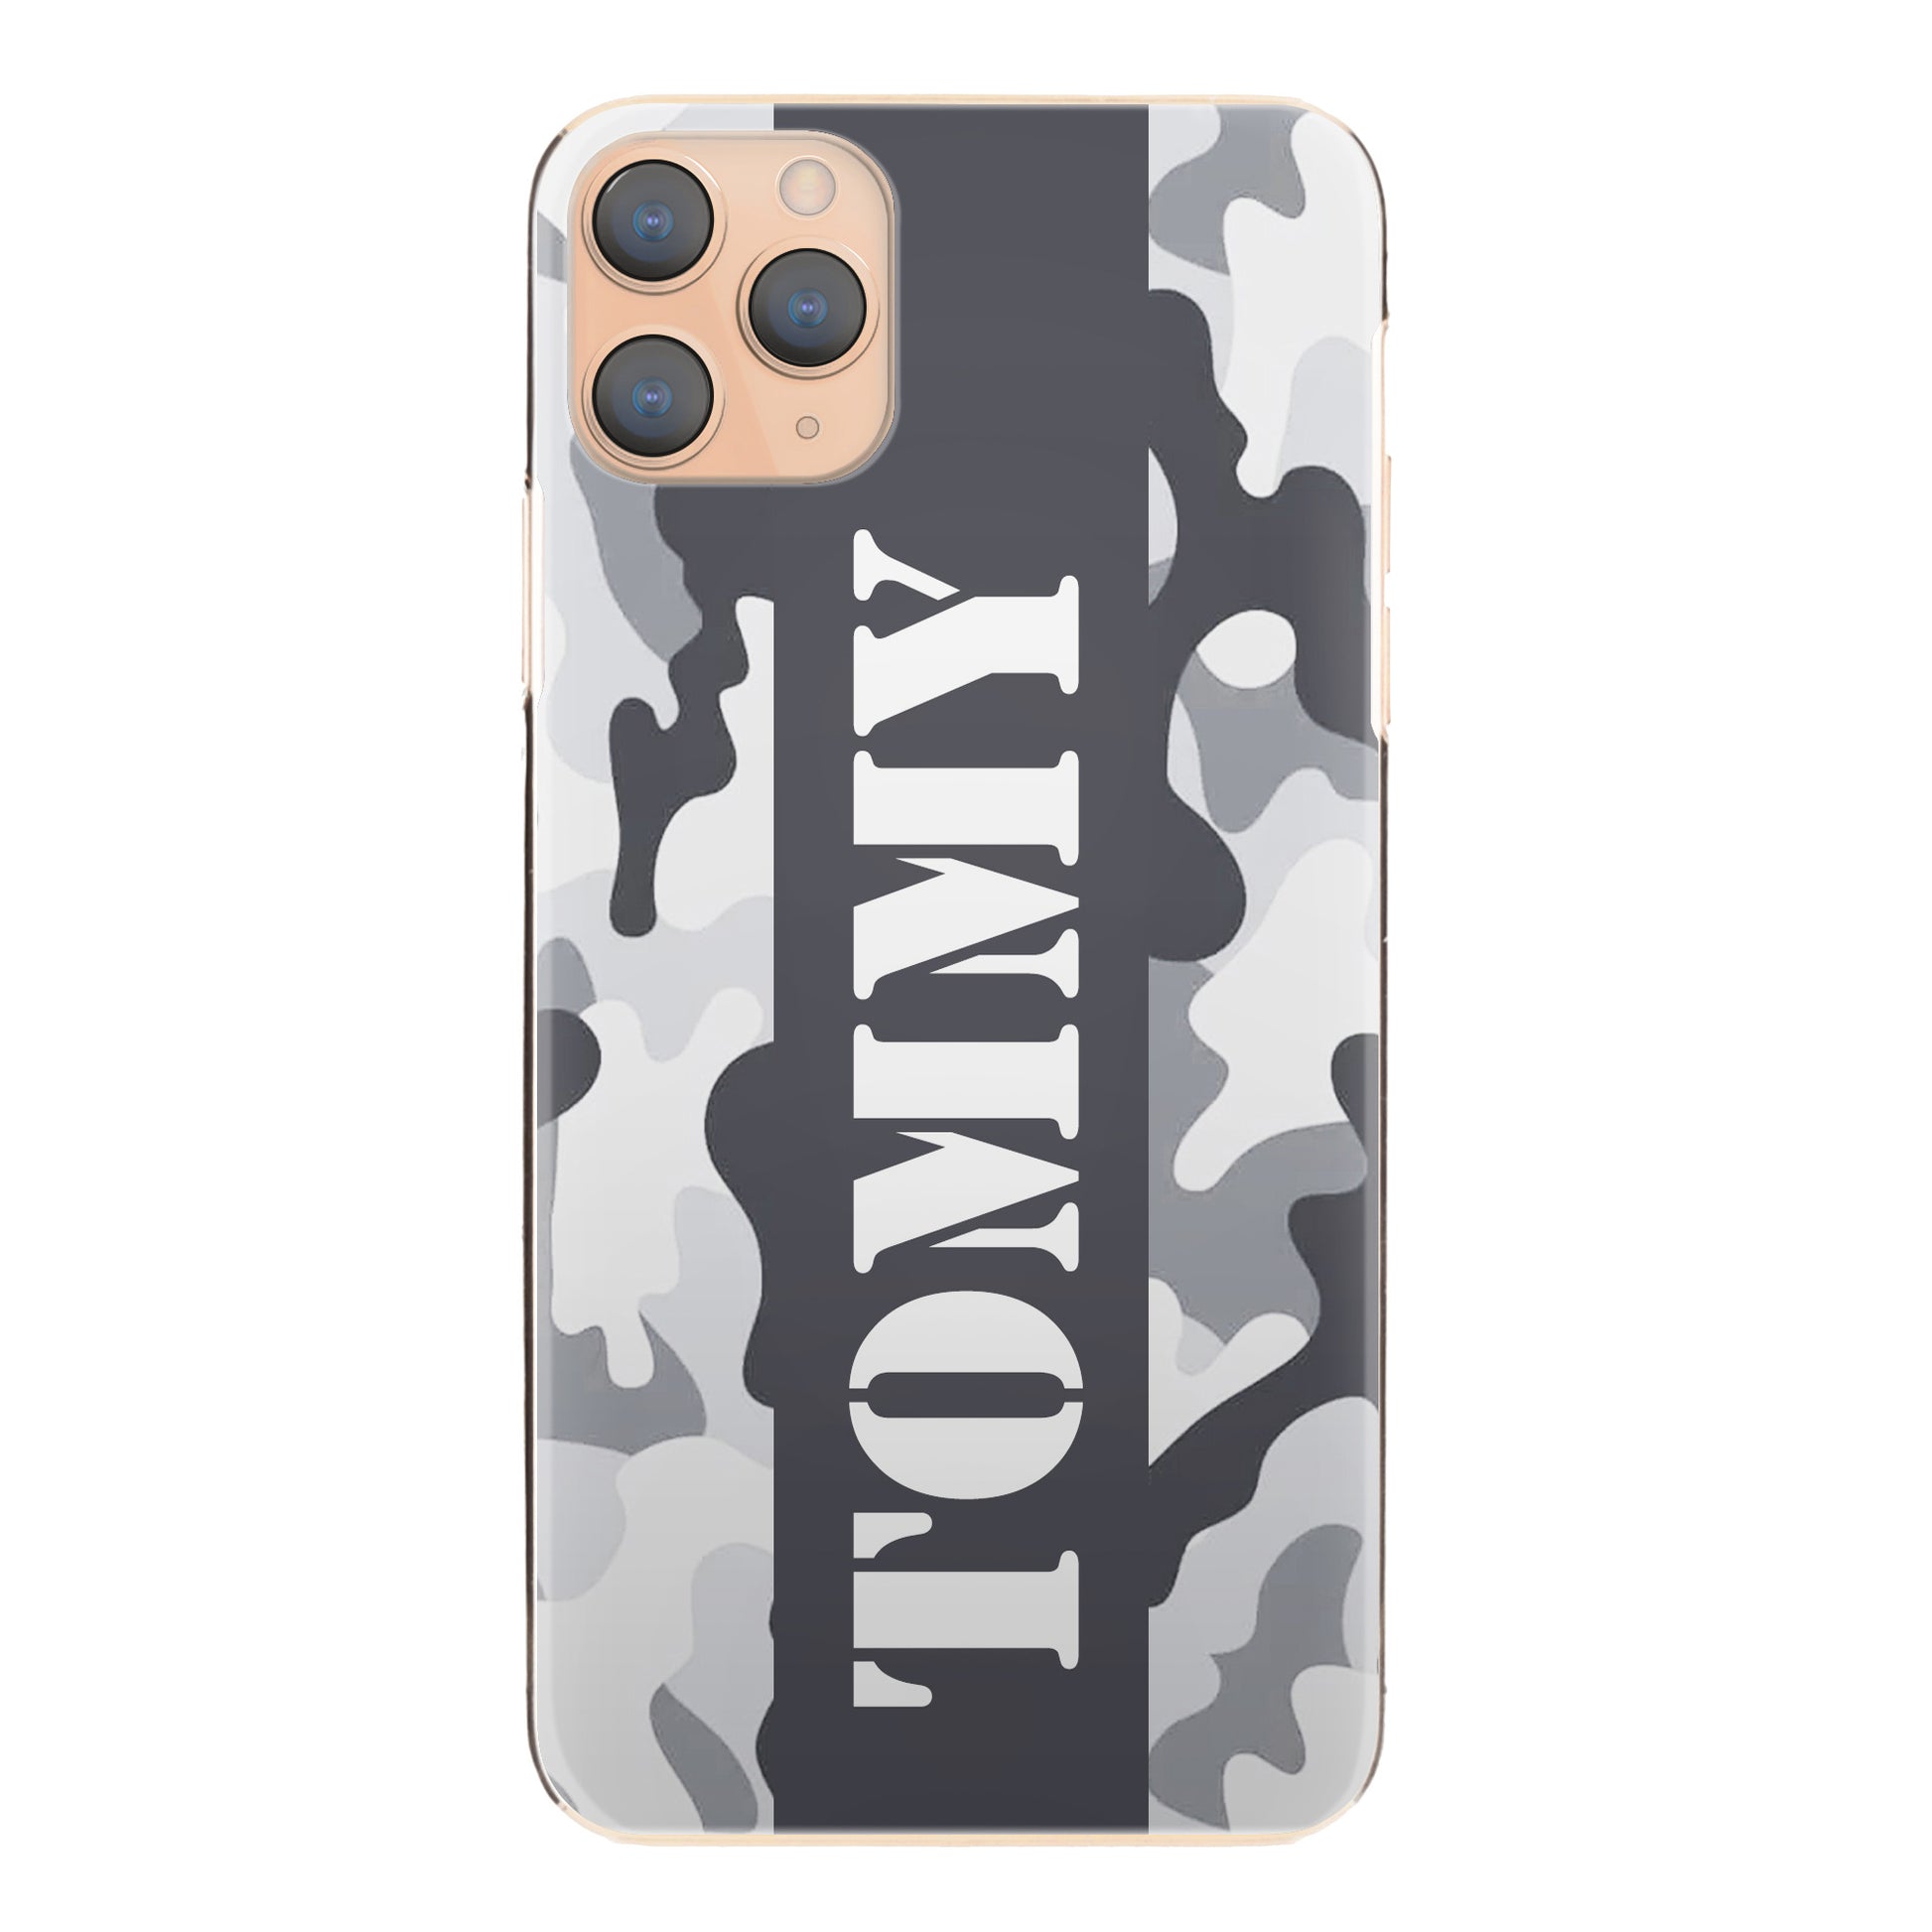 Personalised Samsung Galaxy Phone Hard Case with Military Text on Artic Camo